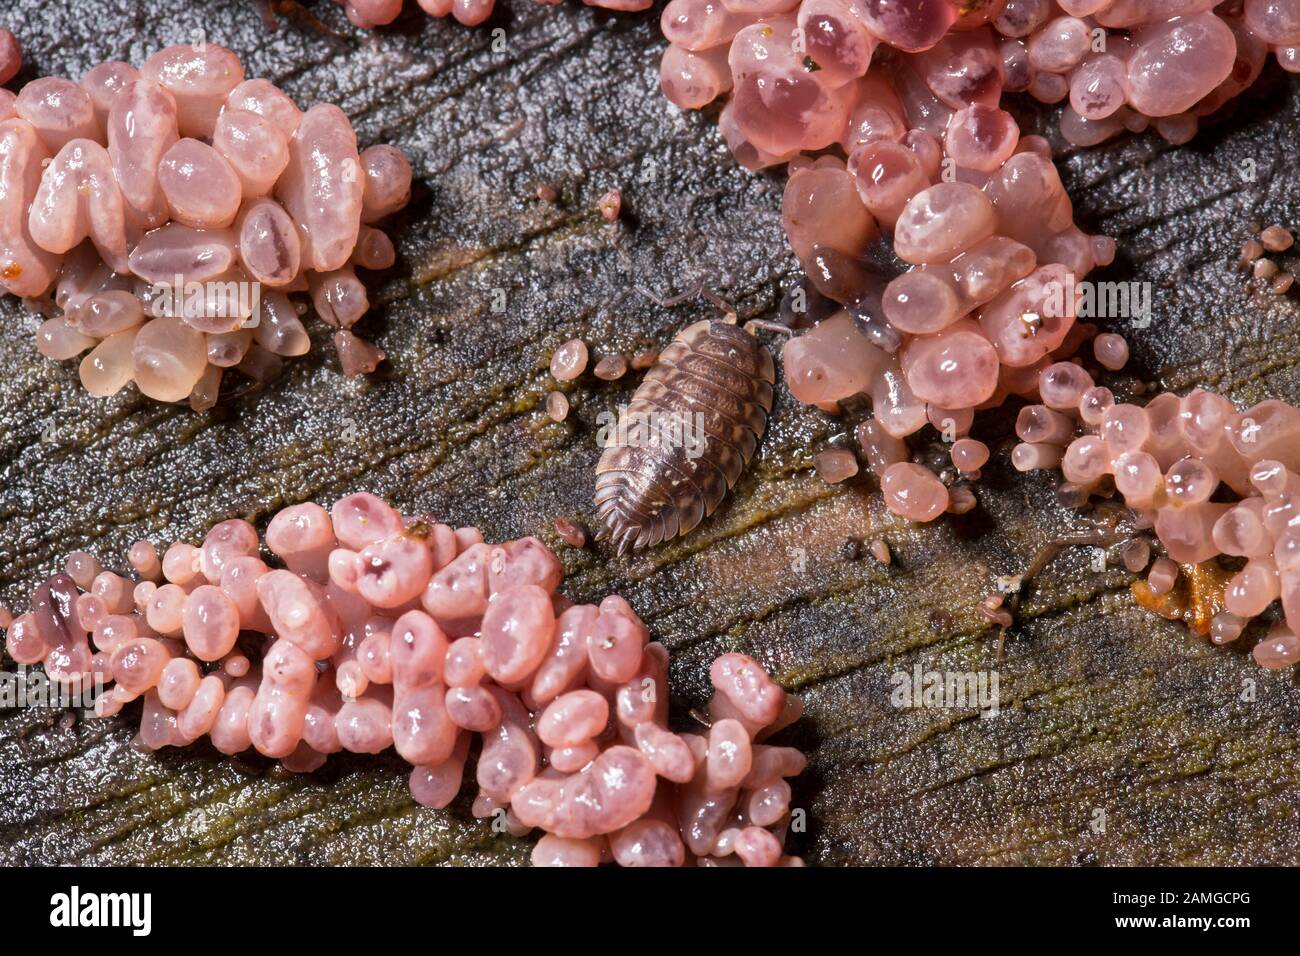 A Common Shiny woodlouse, Onisus ocellus, resting on bark surrounded by purple jellydisc fungi, Ascocoryne sarcoides, in a garden in Lancashire photog Stock Photo